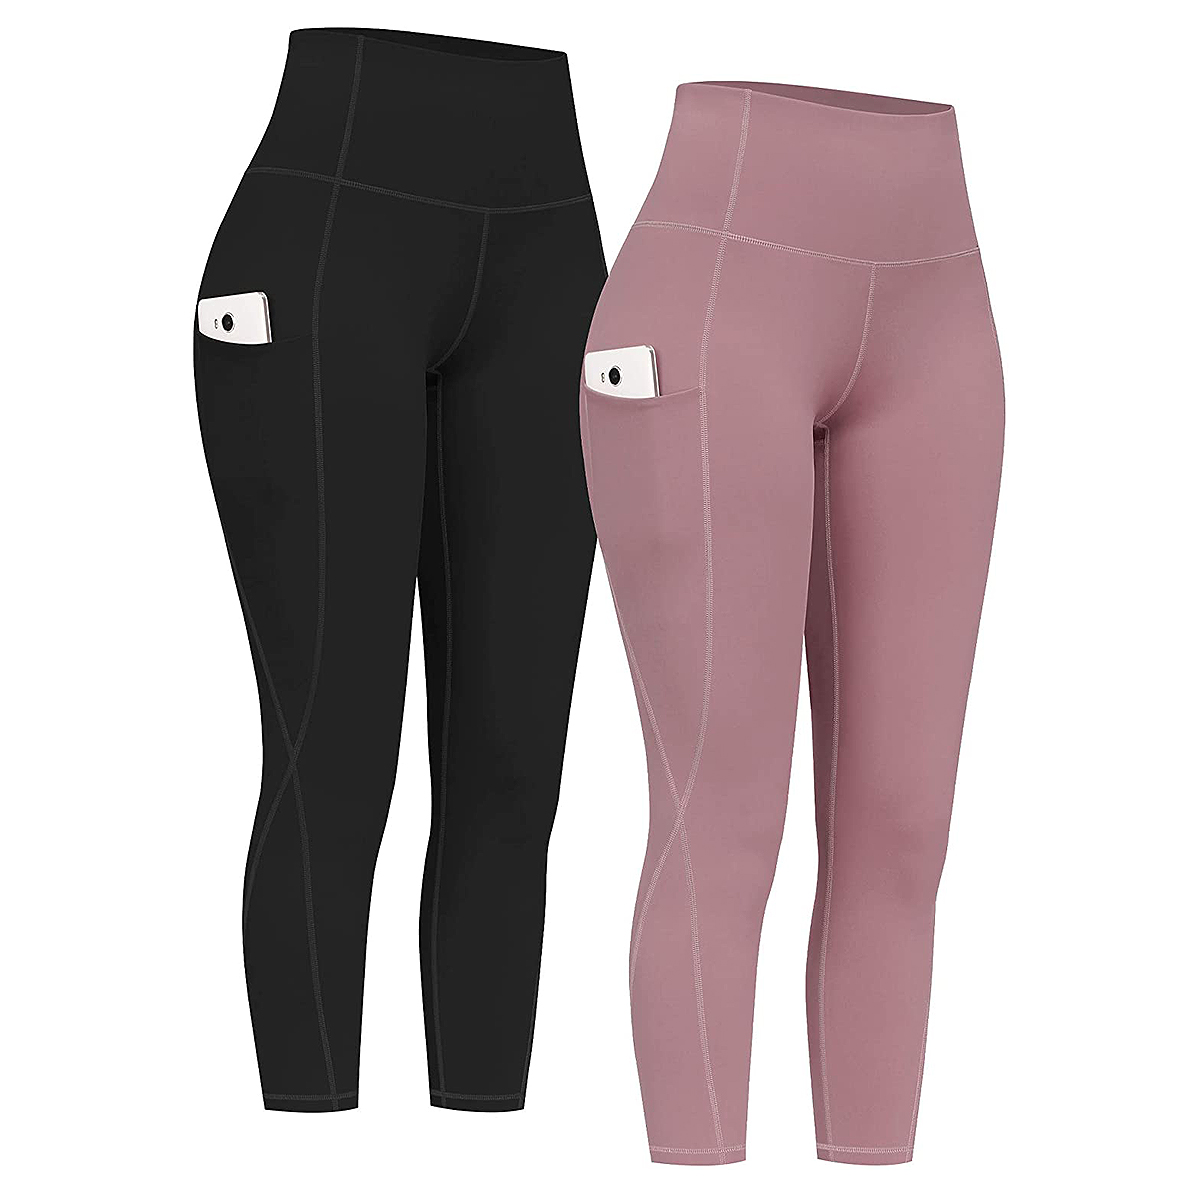 These Are the 15 Best Quality Leggings and Yoga Pants on Amazon | Us Weekly